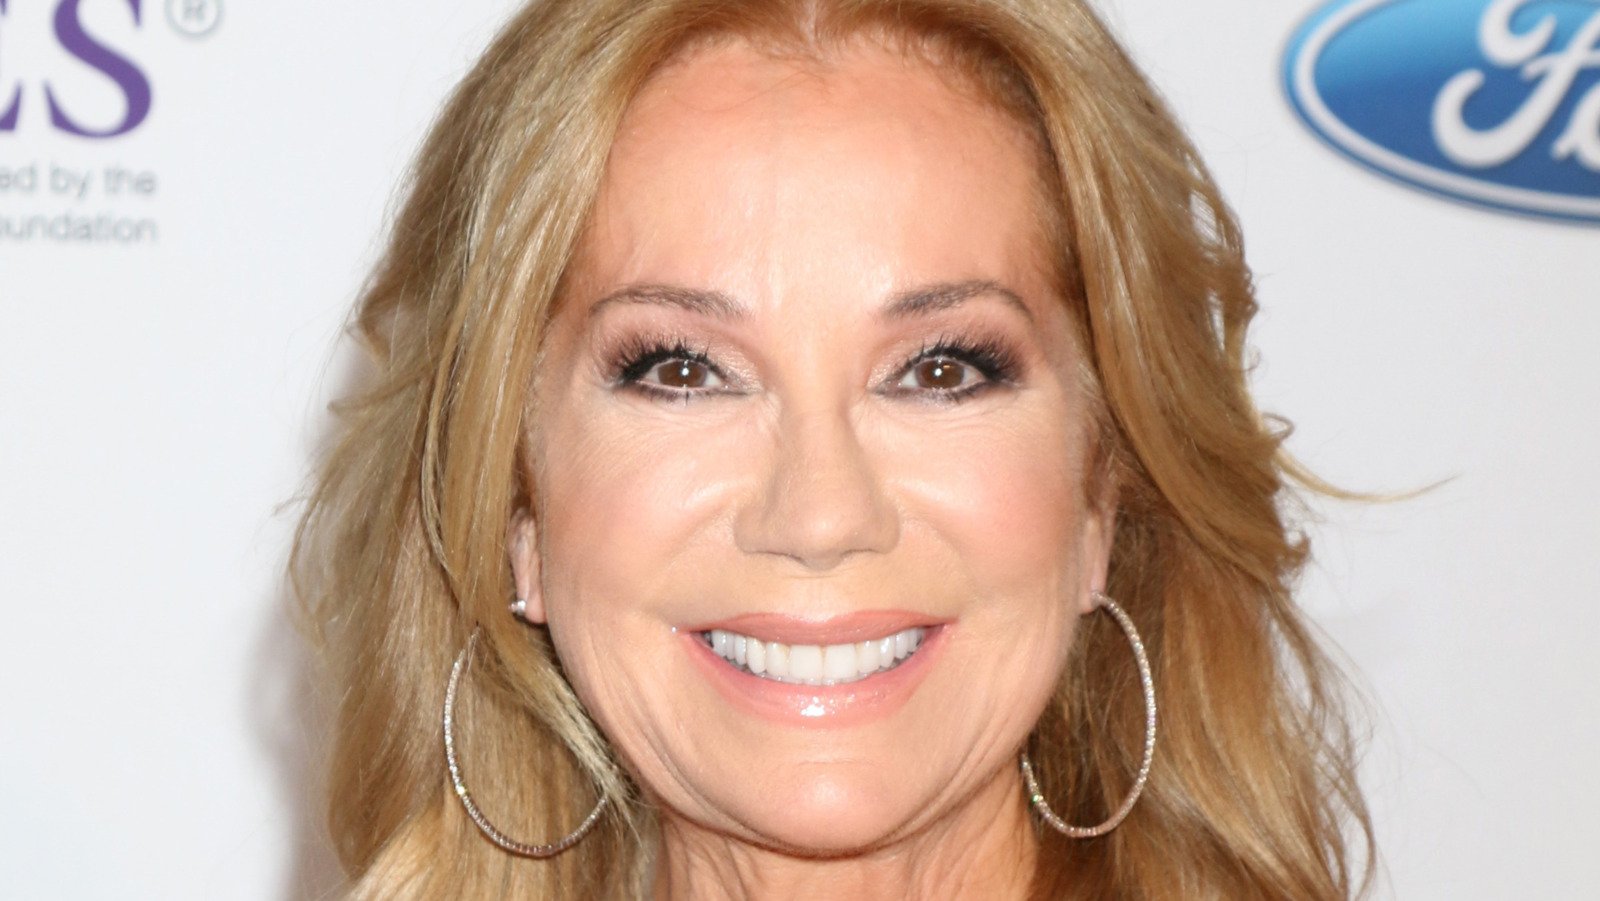 Kathie Lee Gifford Opens Up About Her New Relationship